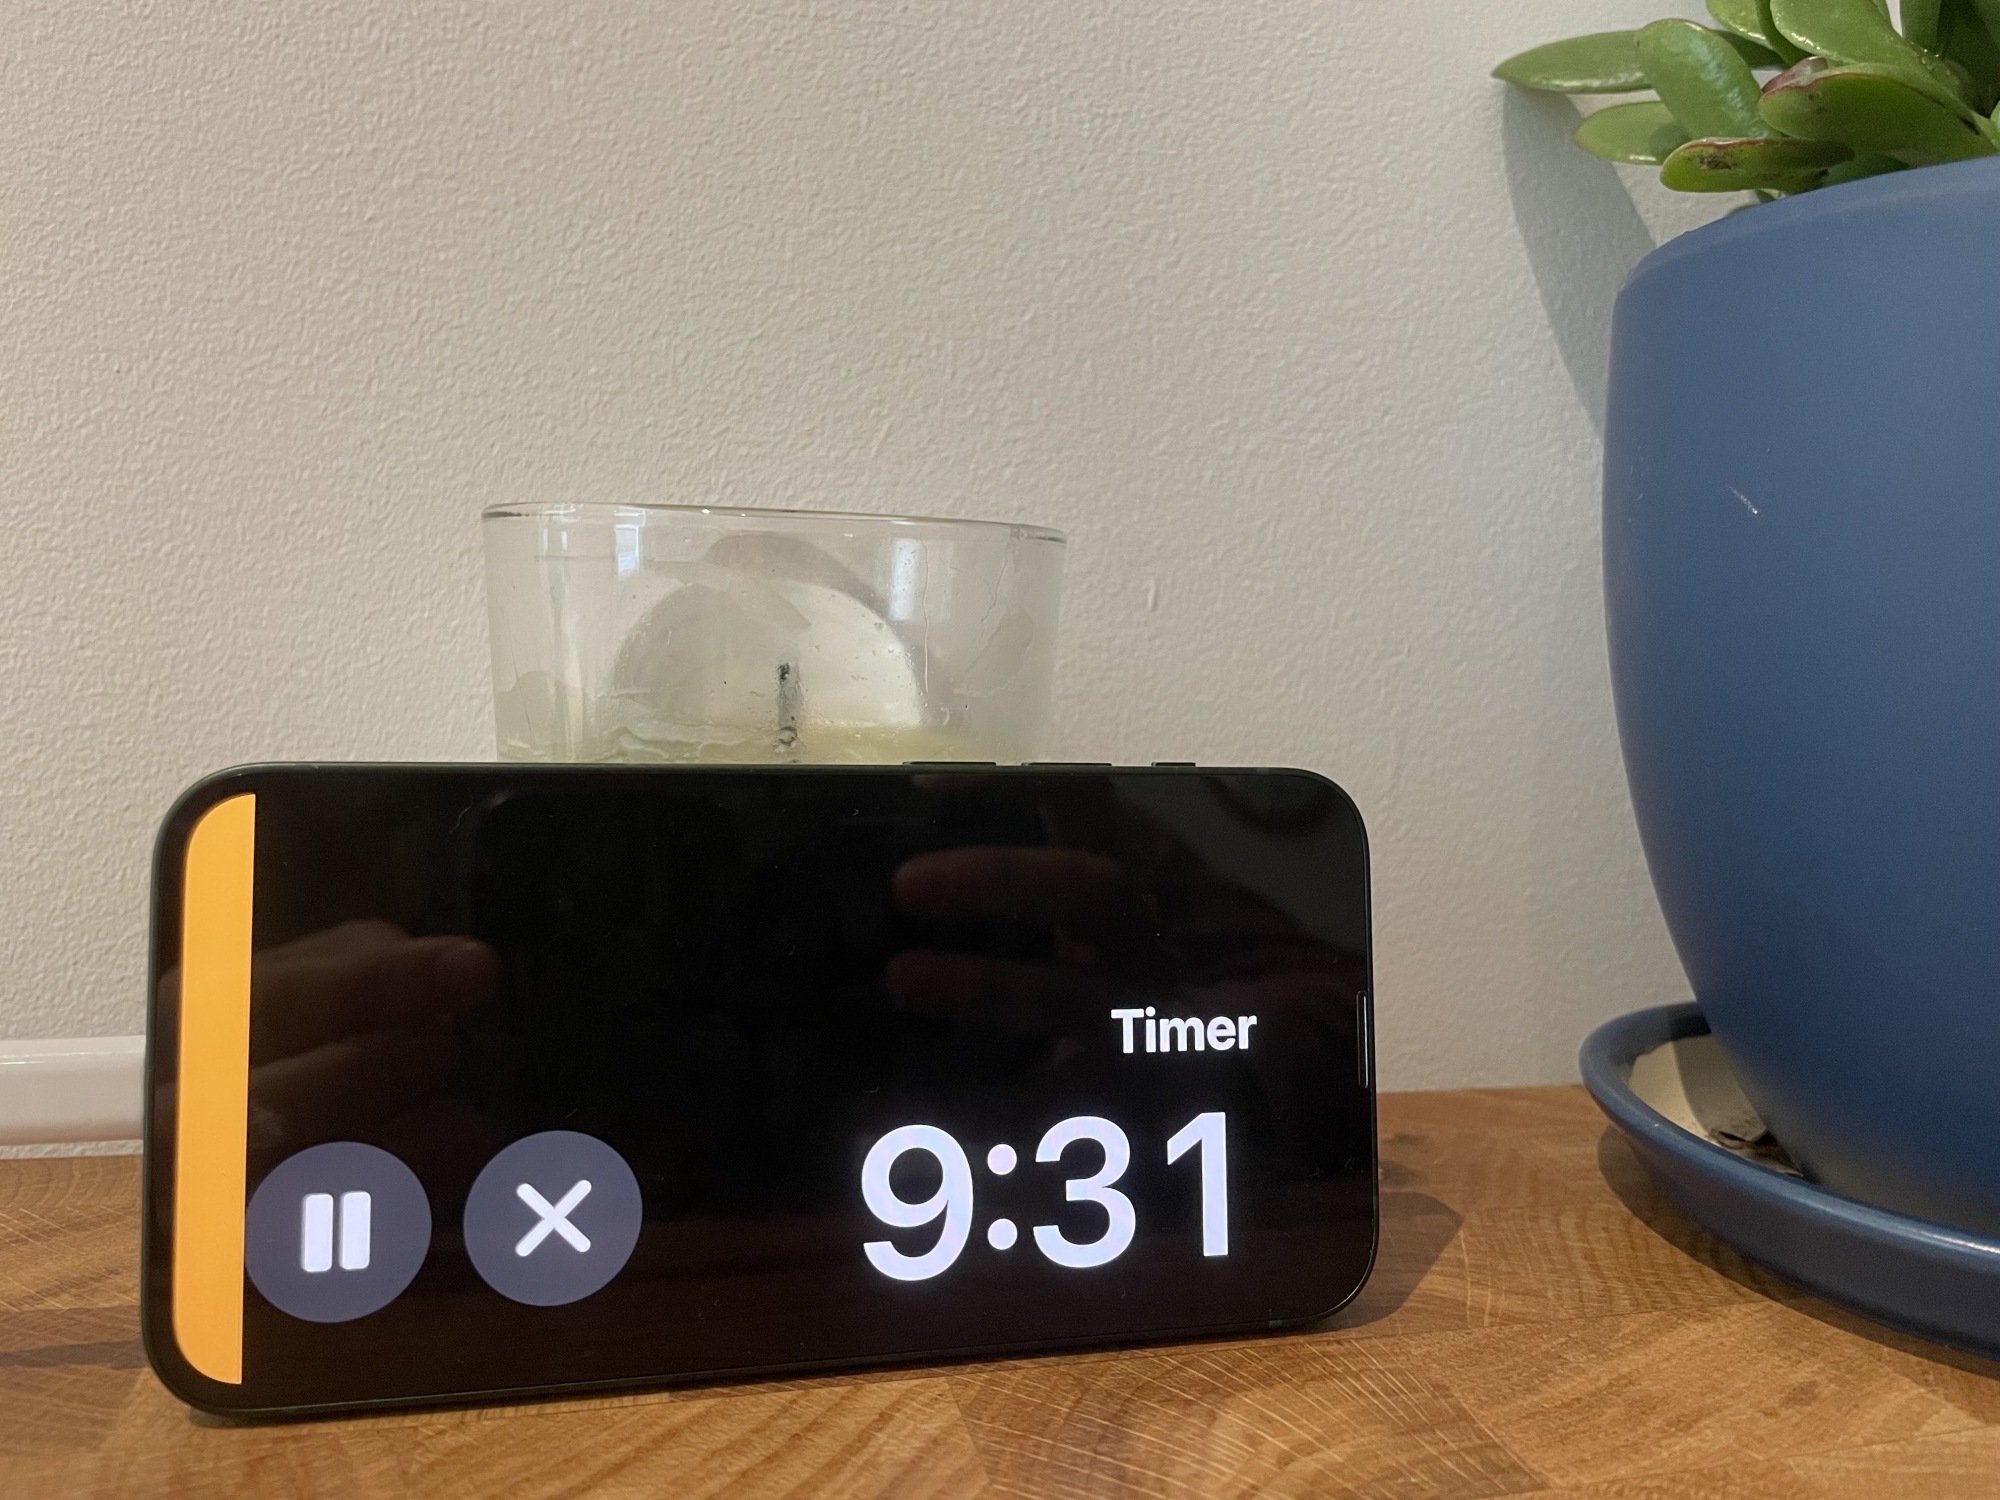 StandBy on iOS 17 showing a timer